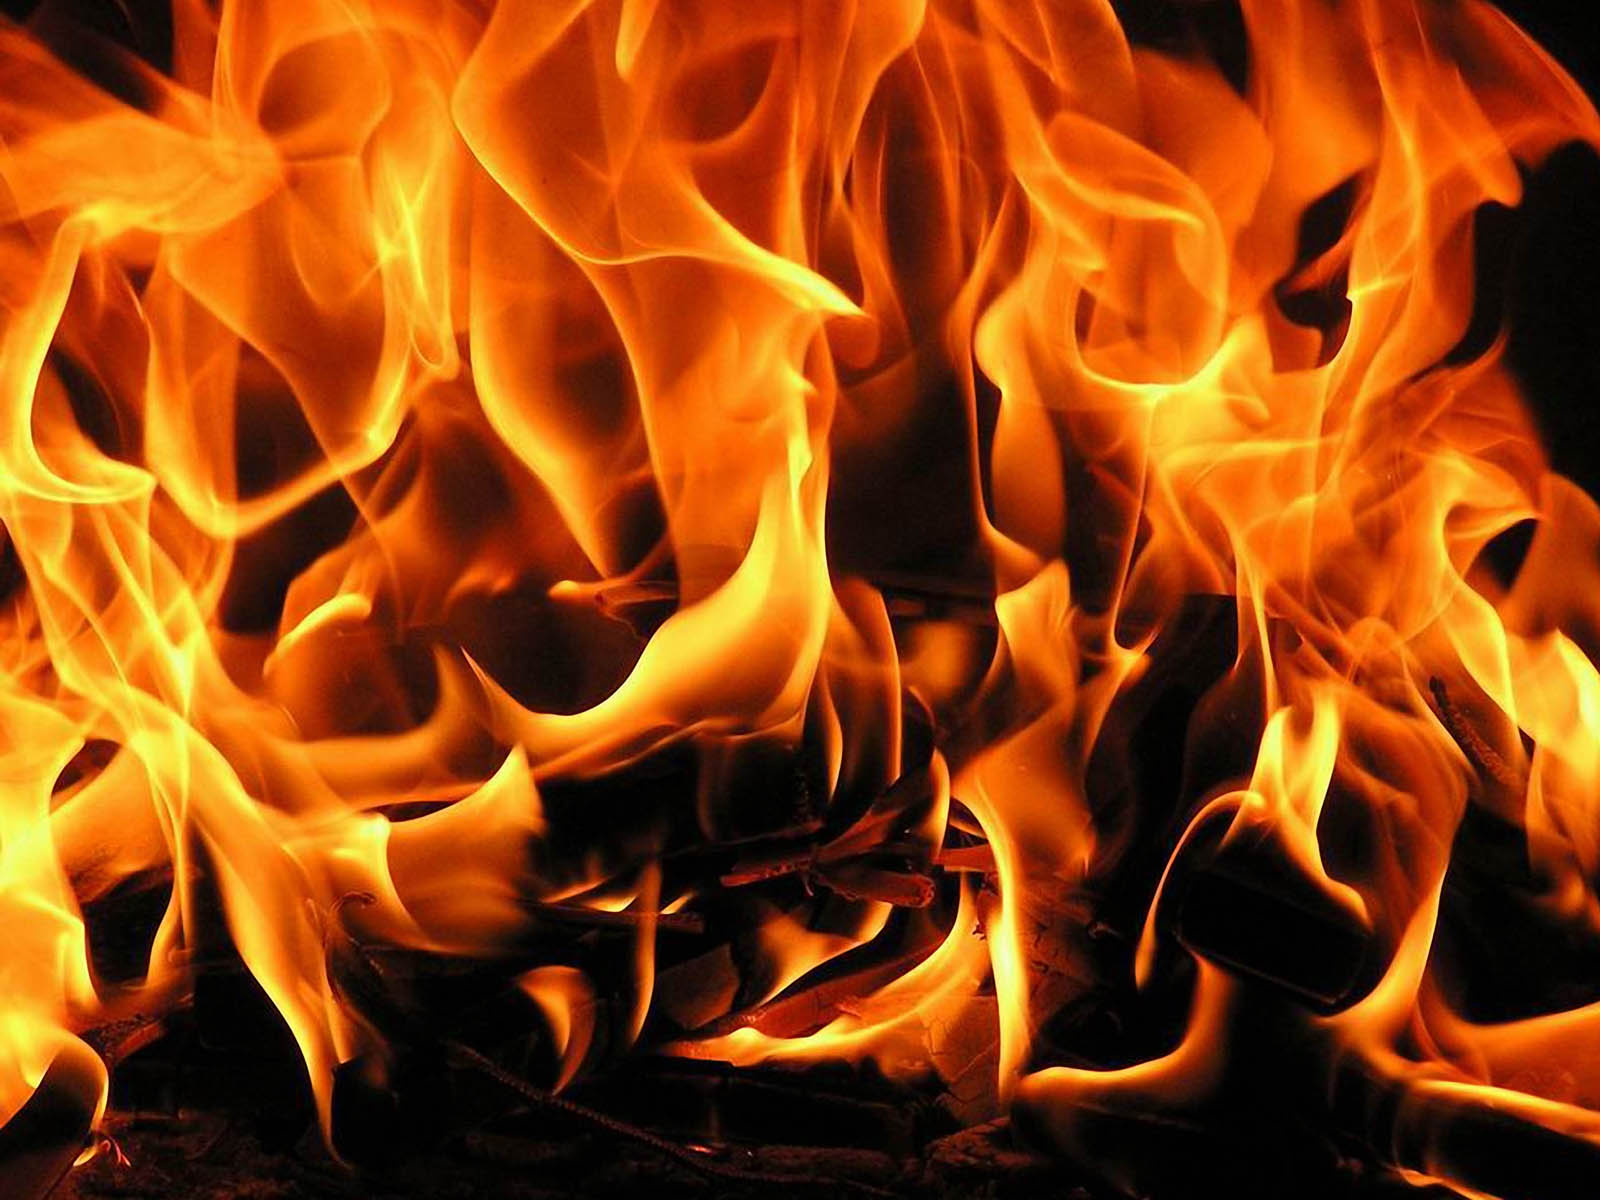 Tag Fire Flames Images Photos Pictures Wallpapers and Backgrounds 1600x1200